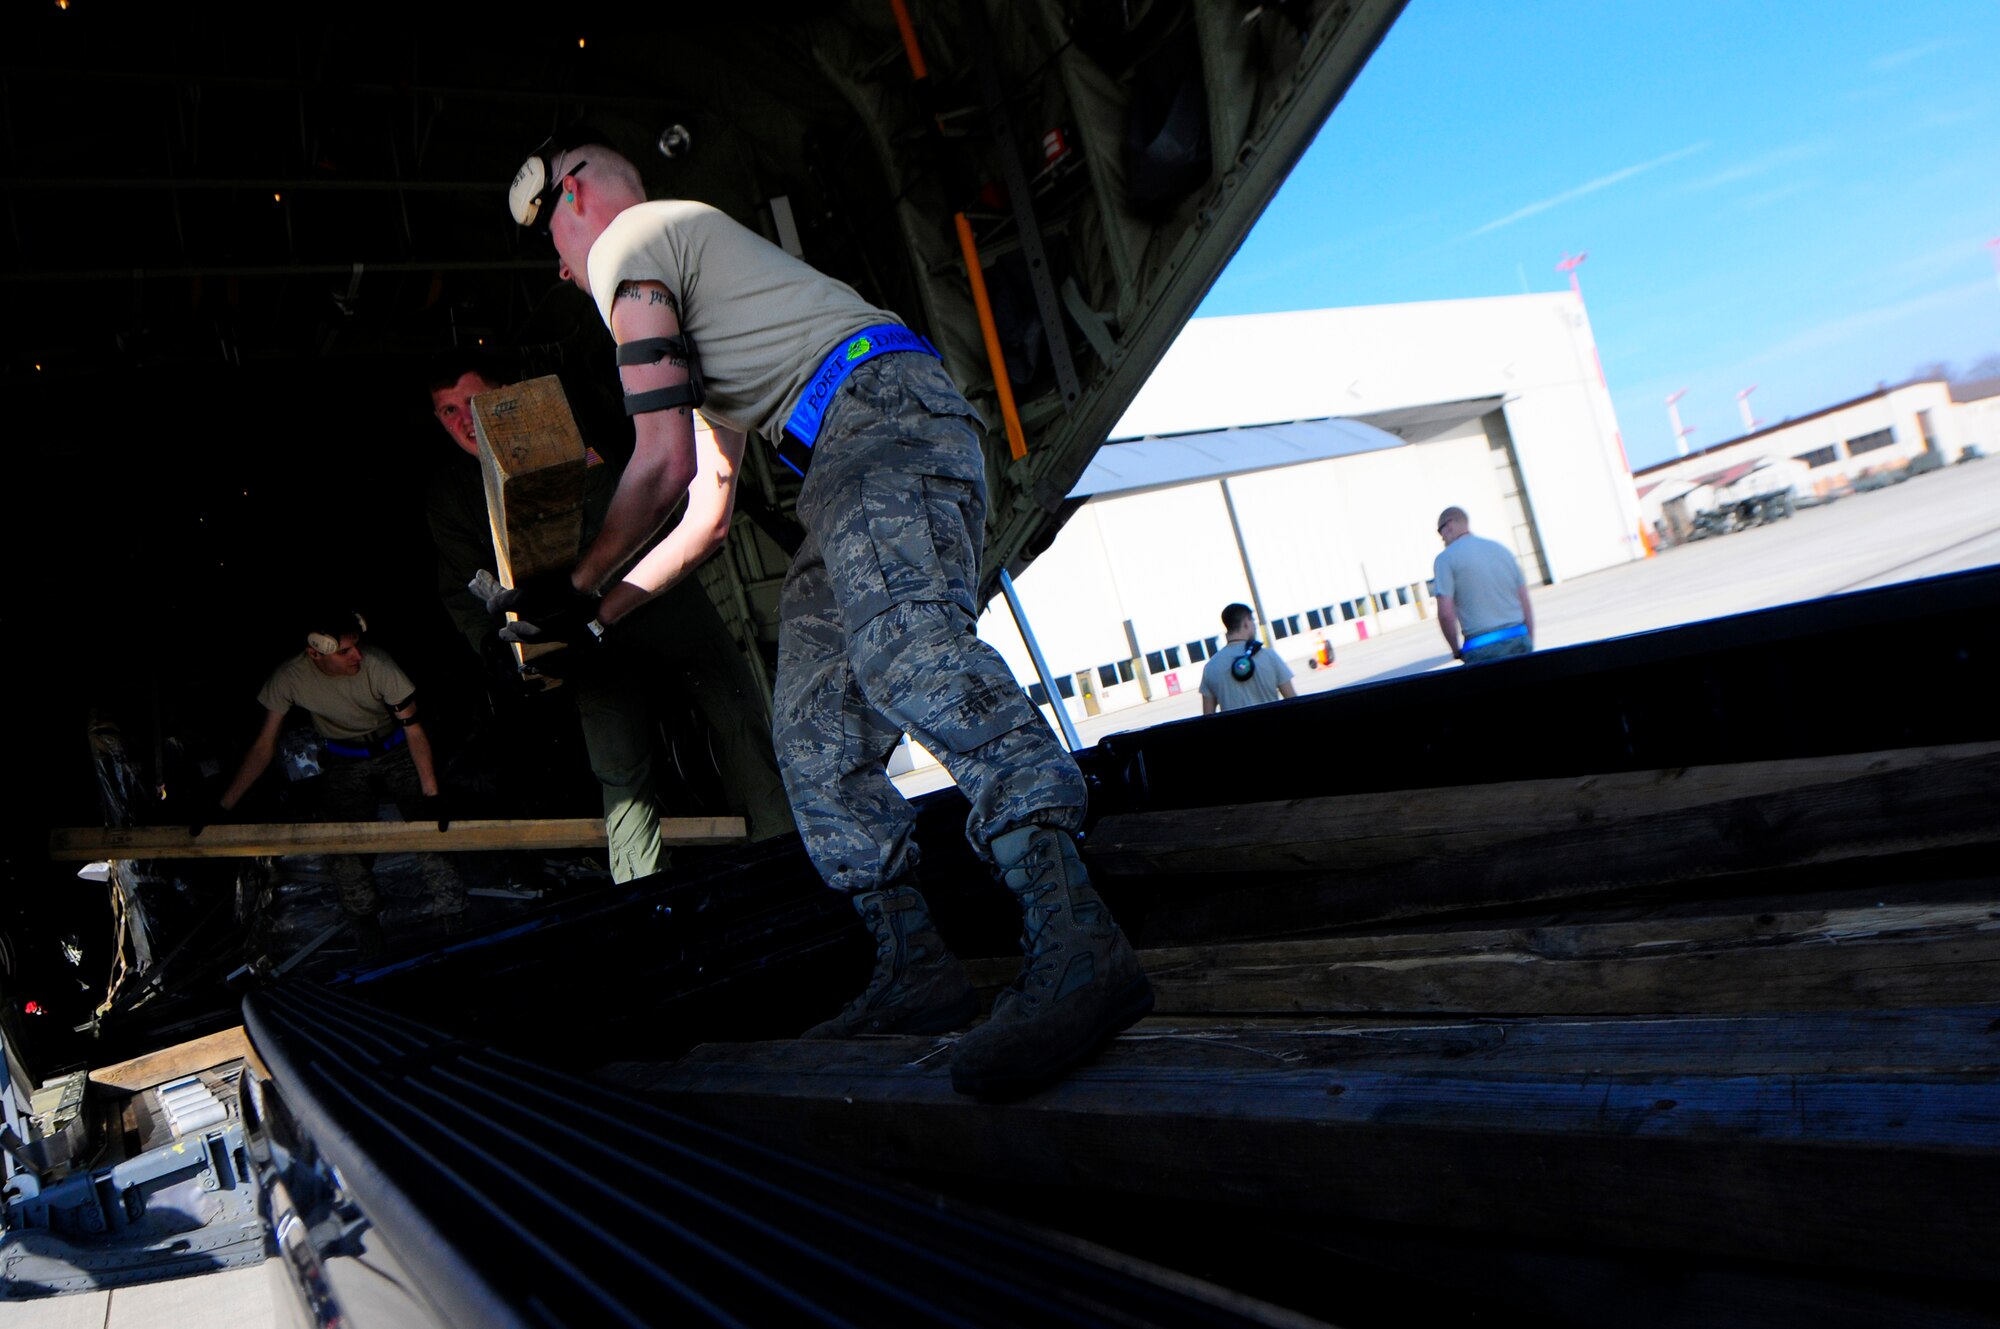 U.S. Air Force Airmen from the 721st Aerial Port Squadron load cargo onto a C-130J Super Hercules for its departure in support of Joint Task Force Odyssey Dawn, Ramstein Air Base, Germany, March 24, 2011. Joint Task Force Odyssey Dawn is the U.S. Africa Command task force established to provide operational and tactical command and control of U.S. military forces supporting the international response to the unrest in Libya and enforcement of United Nations Security Council Resolution 1973. UNSCR 1973 authorizes all necessary measures to protect civilians in Libya under threat of attack by Qadhafi regime forces. JTF Odyssey Dawn is commanded by U.S. Navy Admiral Samuel J. Locklear, III. (U.S. Air Force Photo by Airman 1st Class Brea Miller)